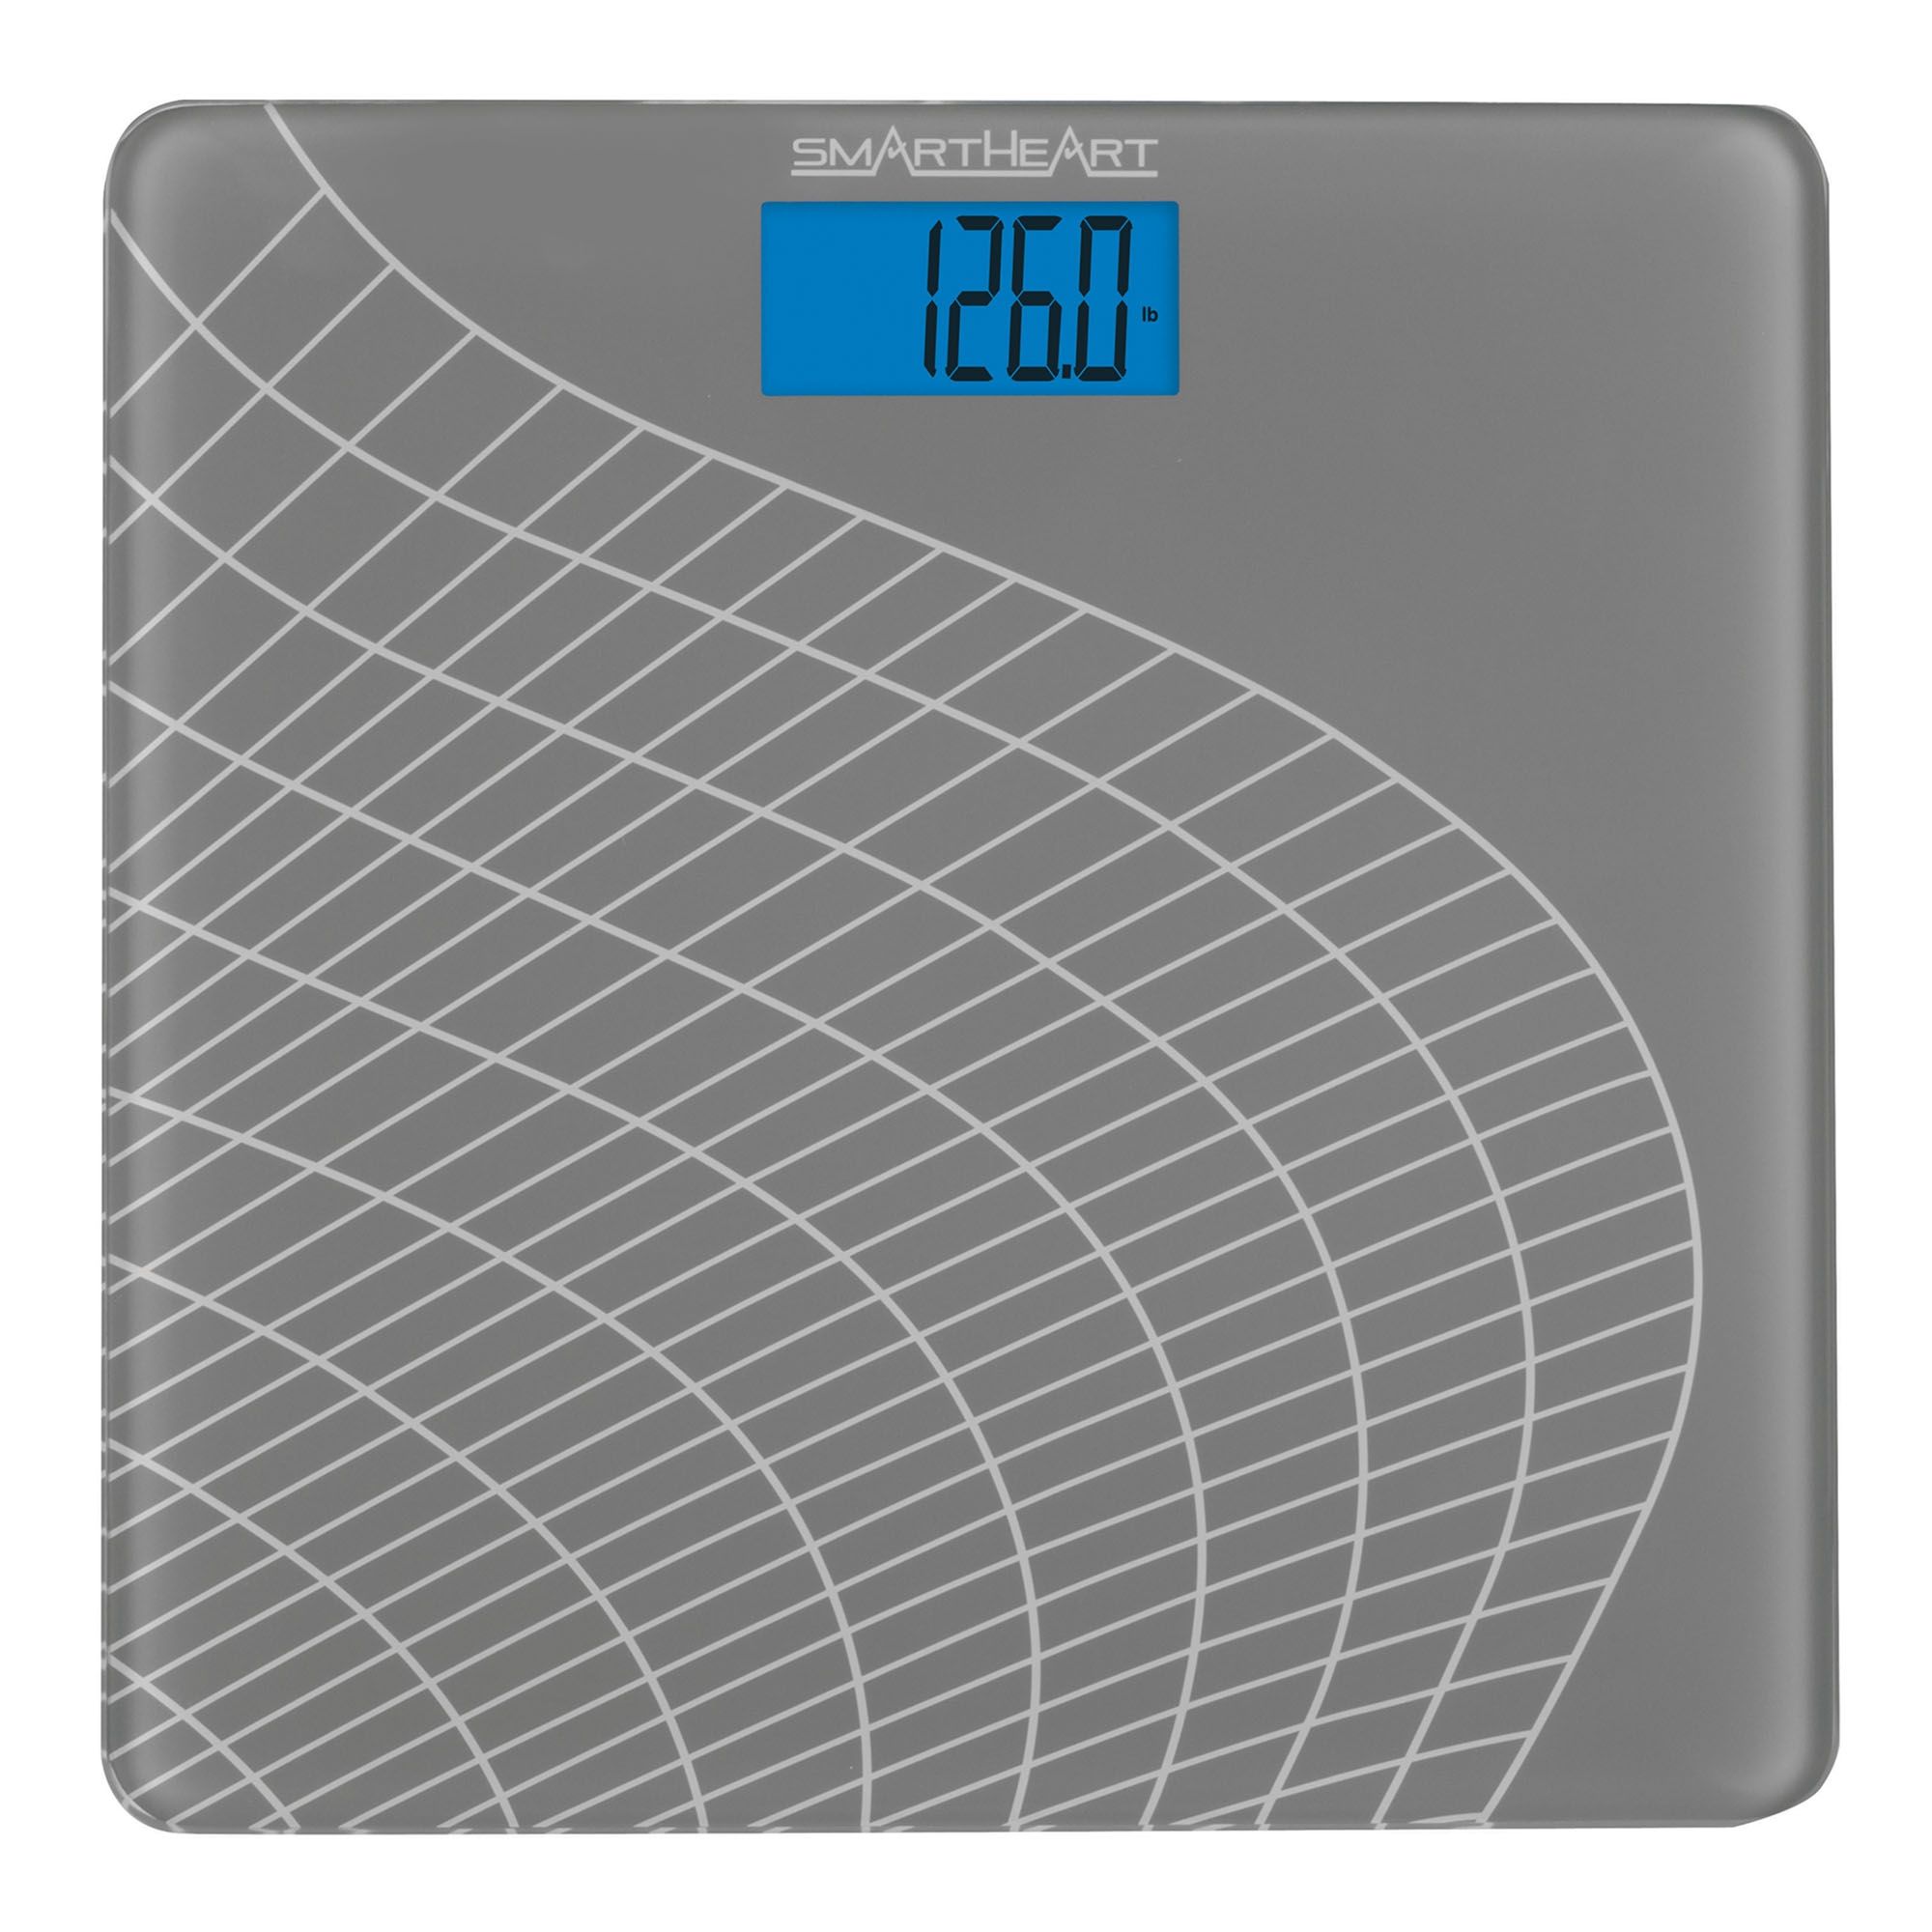 Smartheart Talking Digital Scale | Audible Results in English or Spanish - 438 lbs Weight Capacity